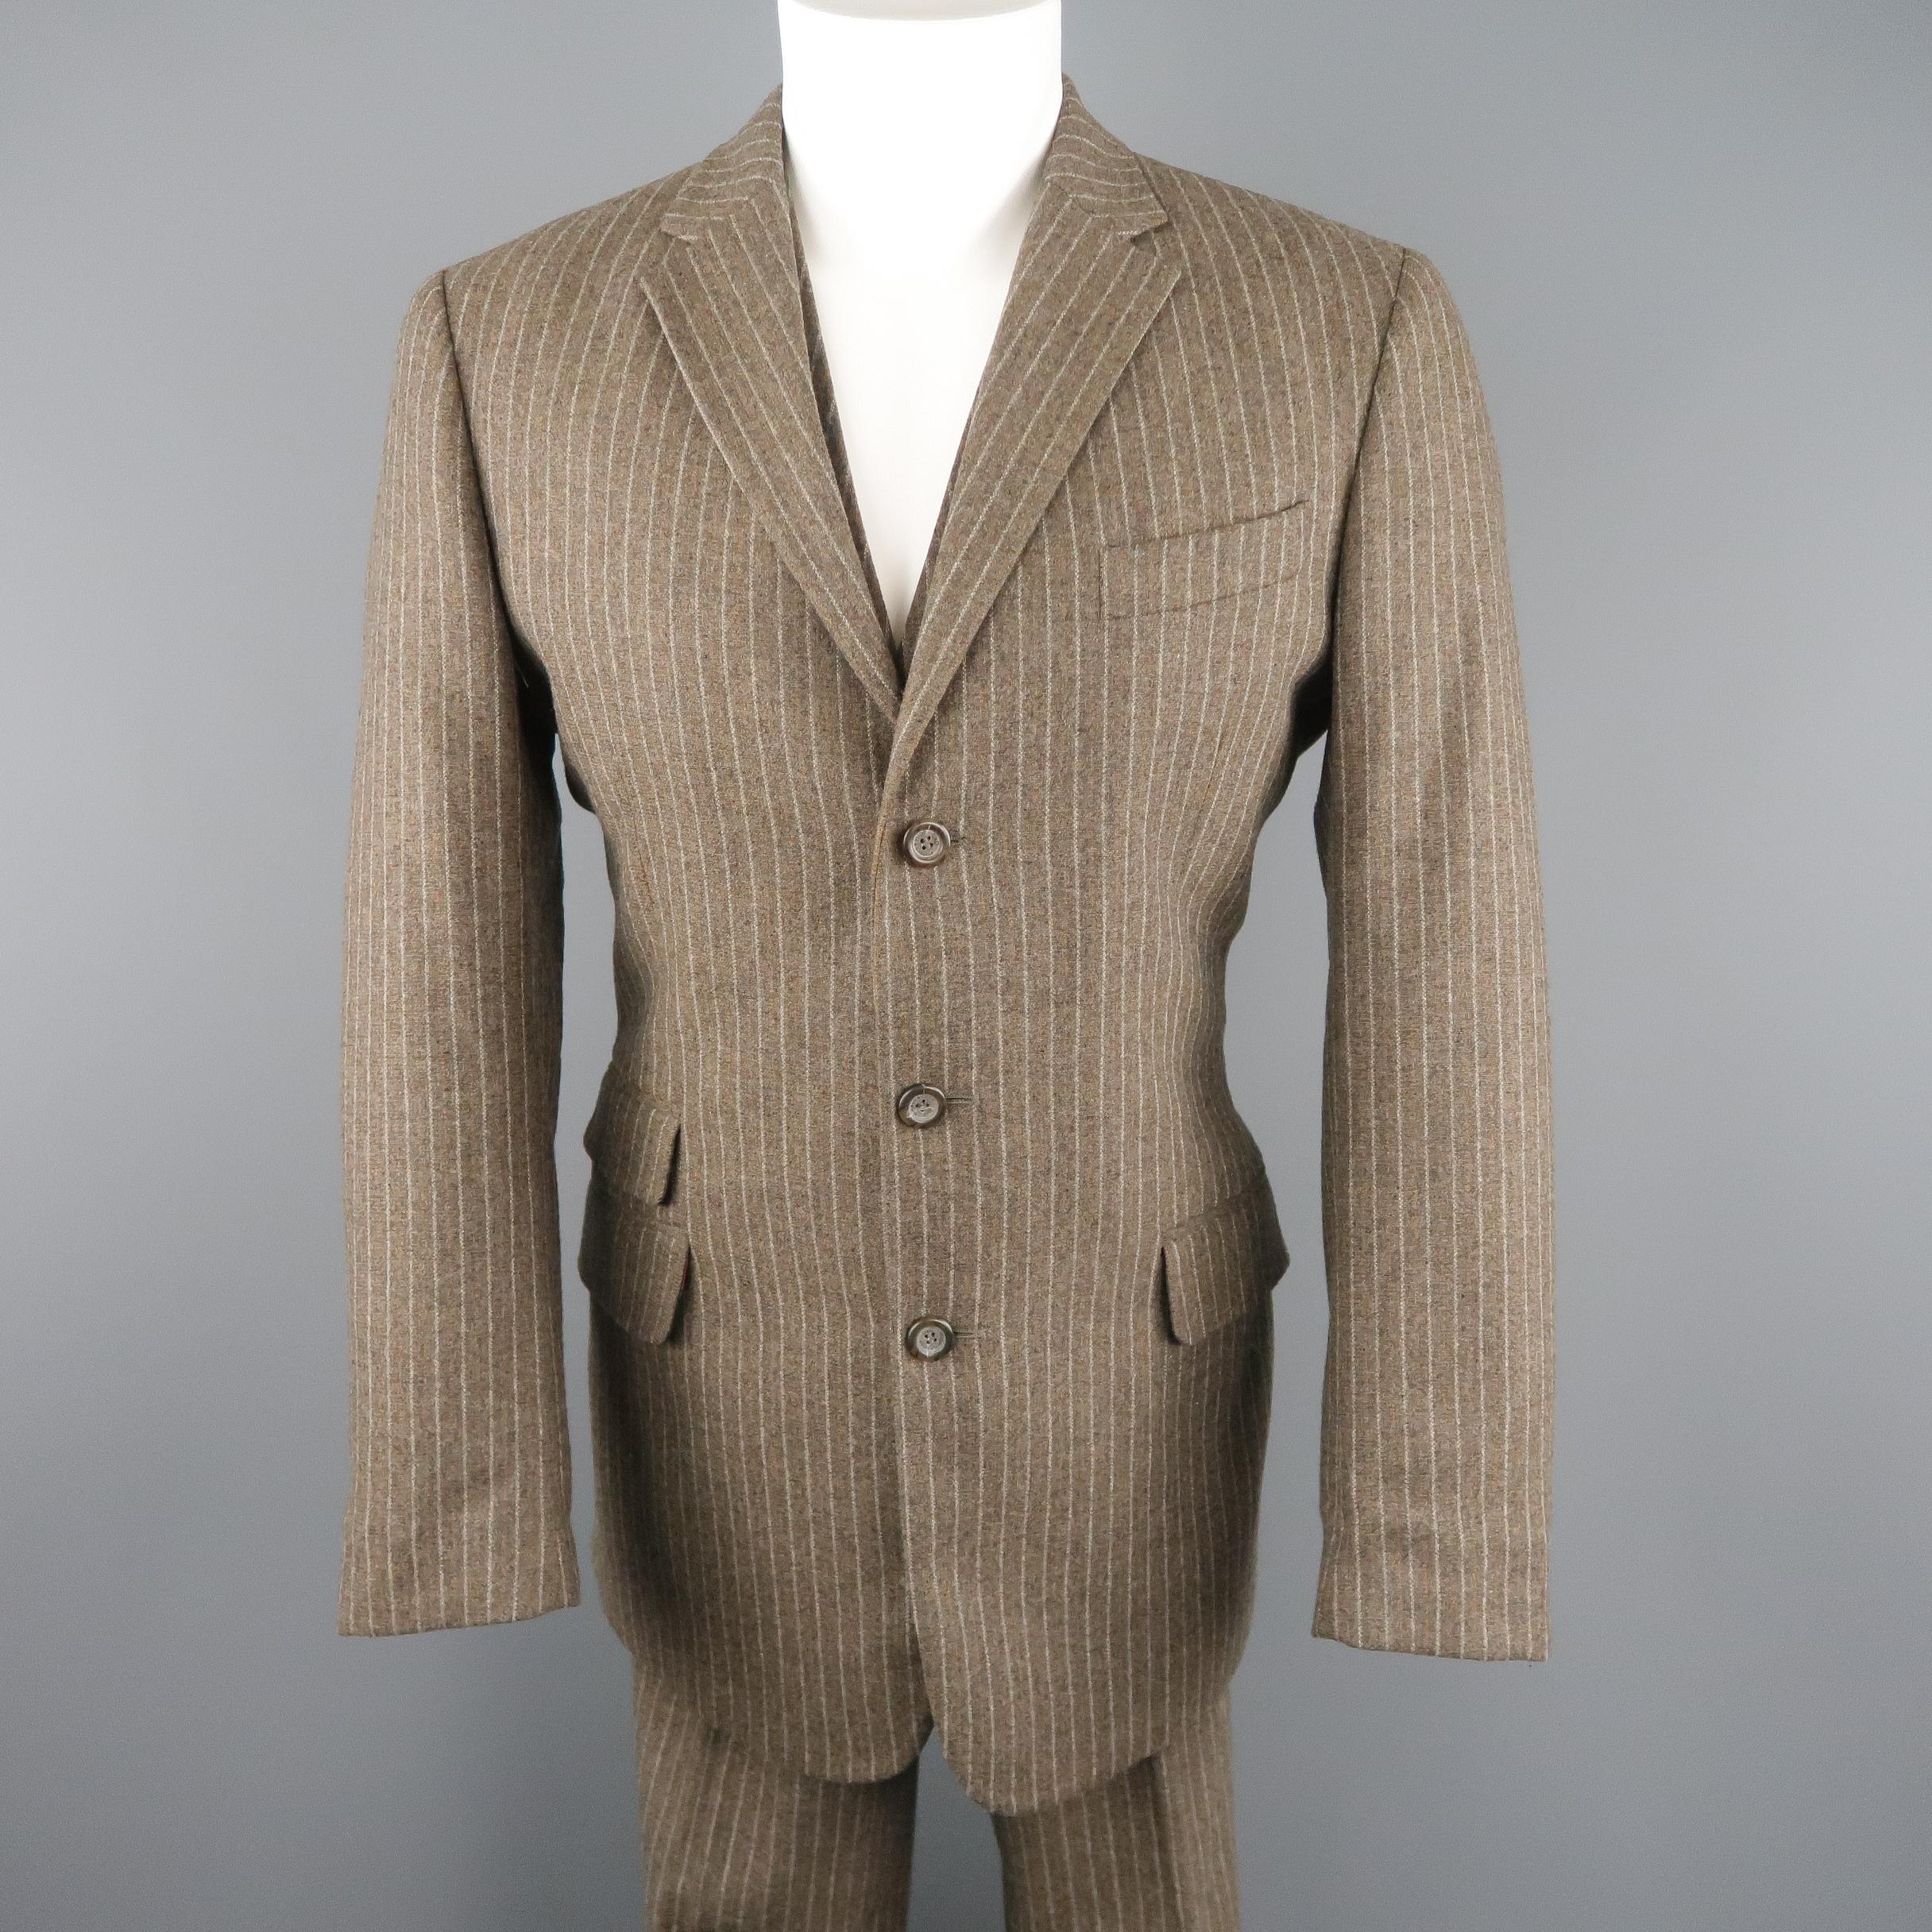 Brown Men's D&G by DOLCE & GABBANA 40 Taupe Stripe Wool Blend 3 Piece Suit